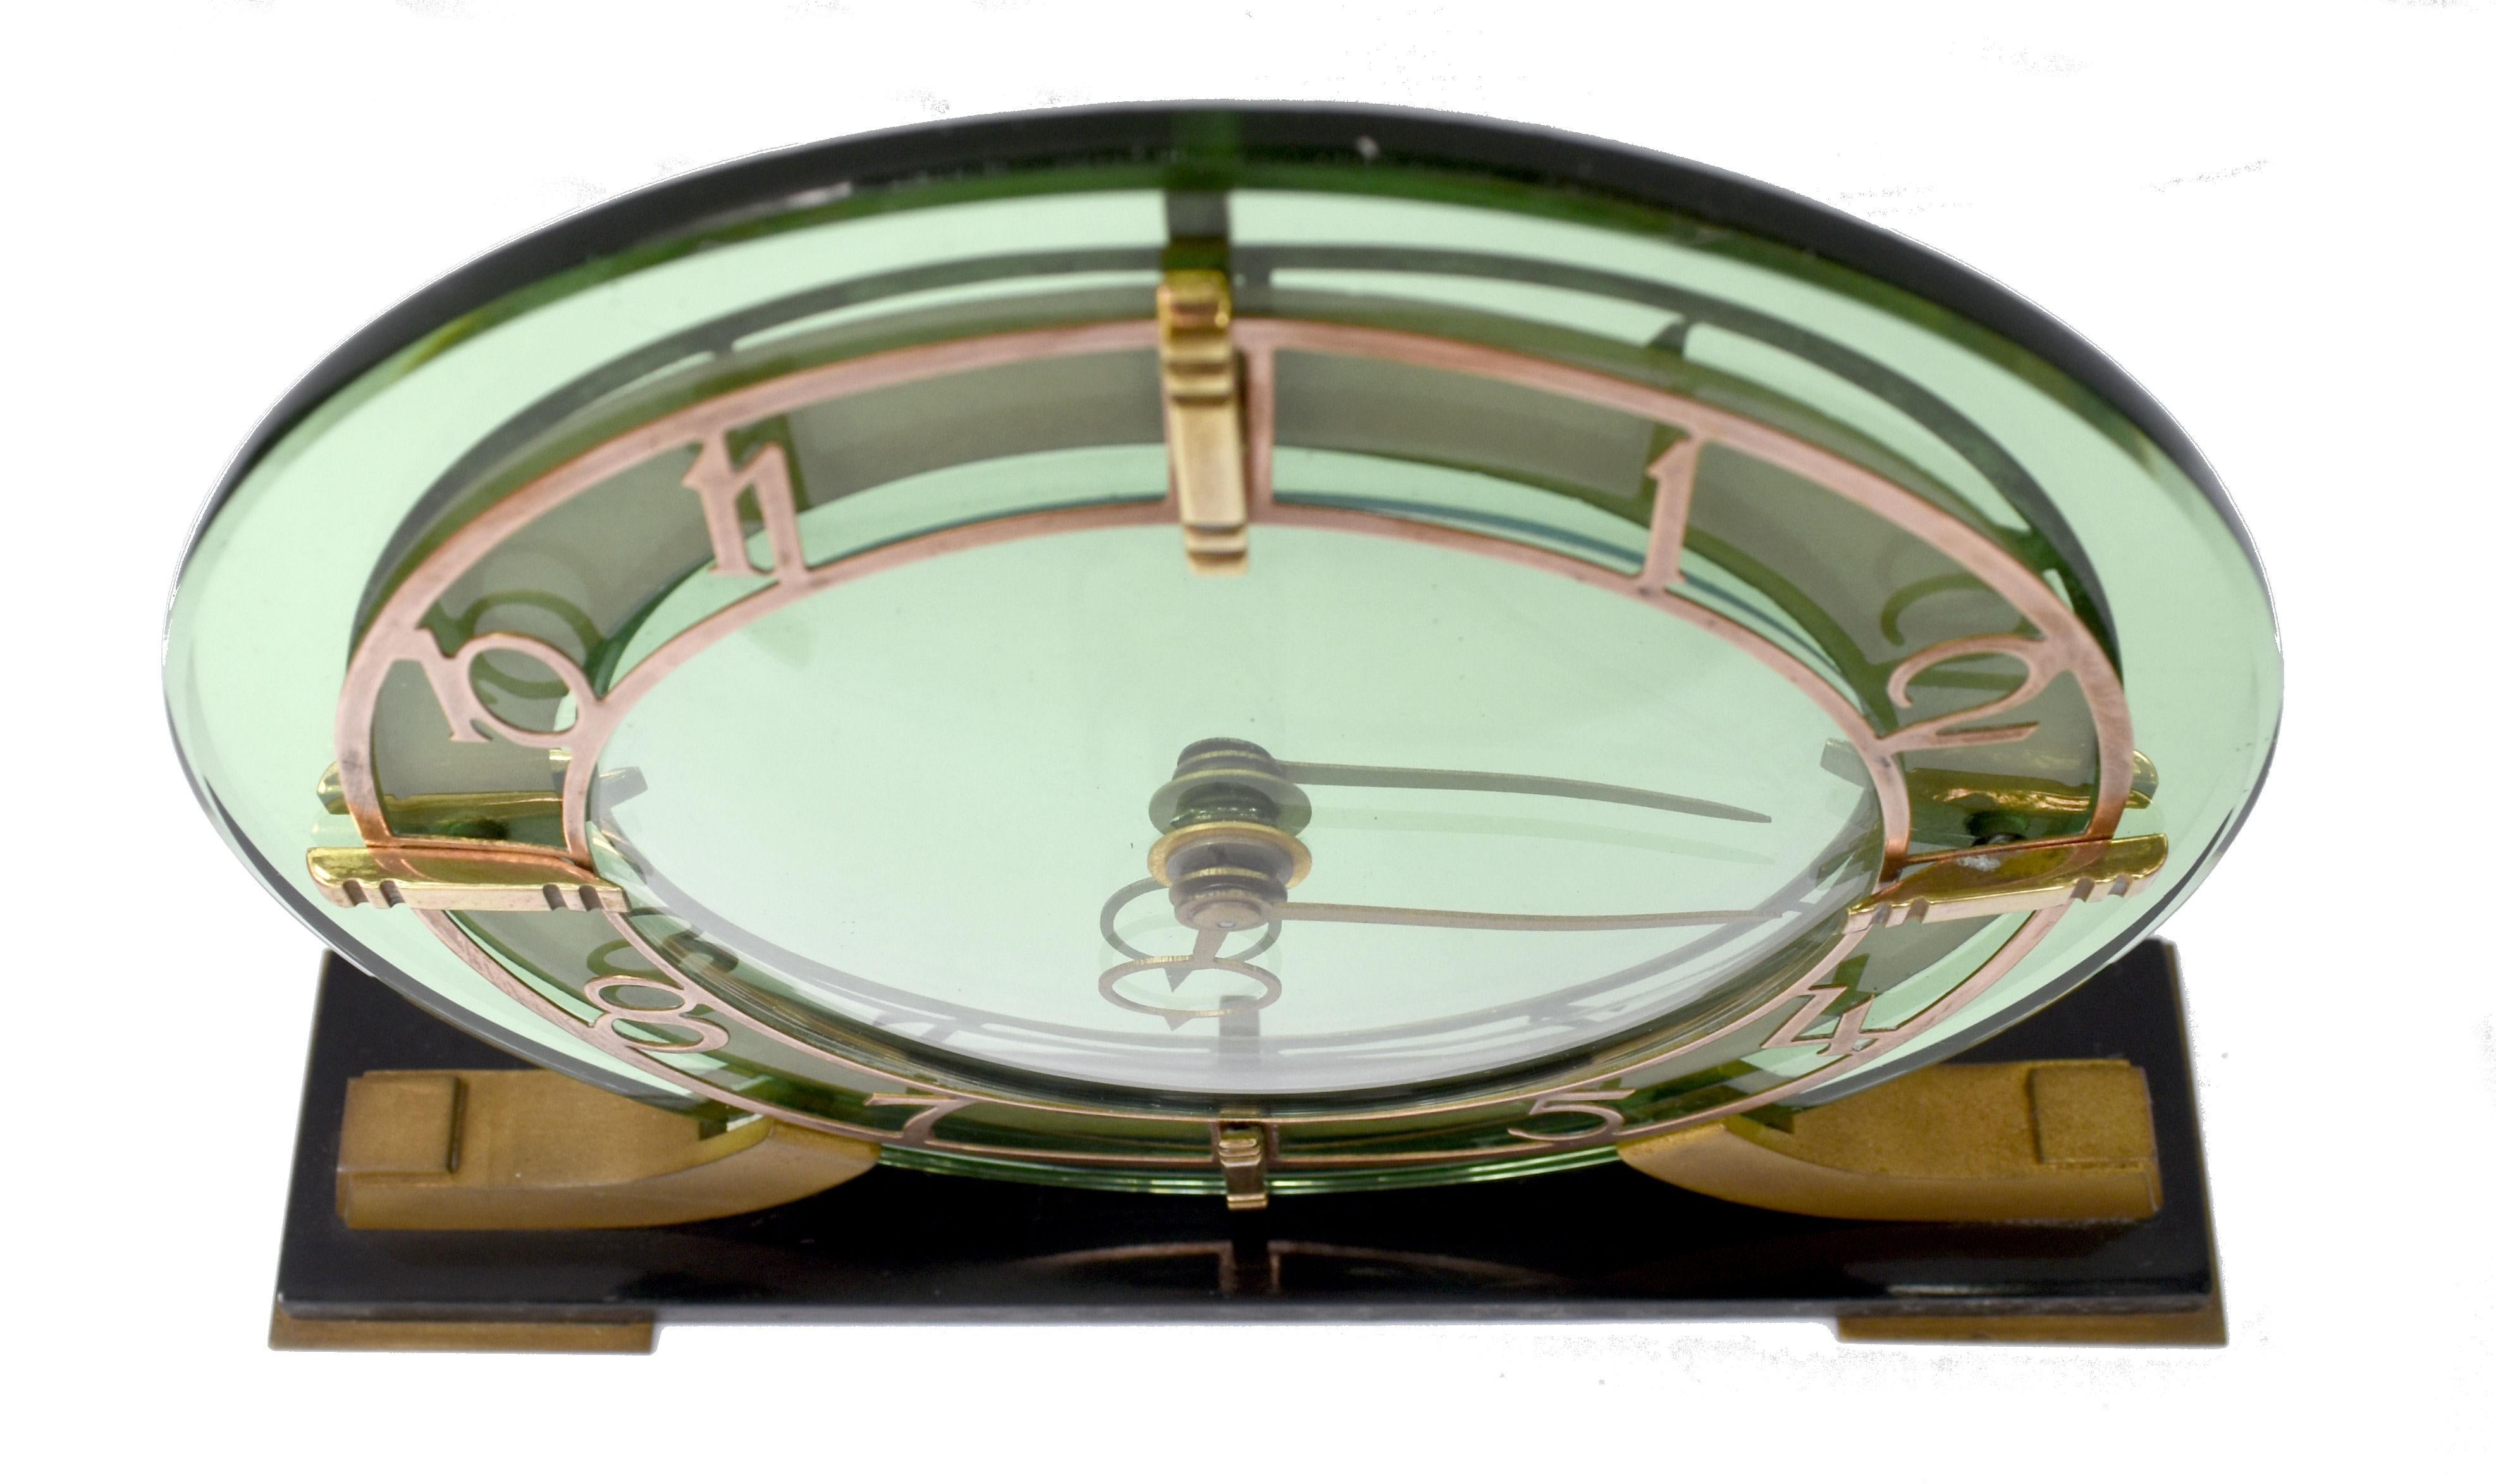 Superb 1930's Art Deco mantel clock by Smiths the British clockmakers . Heavy thick green mirror glass with gold tone stylized Deco numerals all resting on a black vitrolite ( compressed glass) plinth . Beautiful condition throughout, no chips or